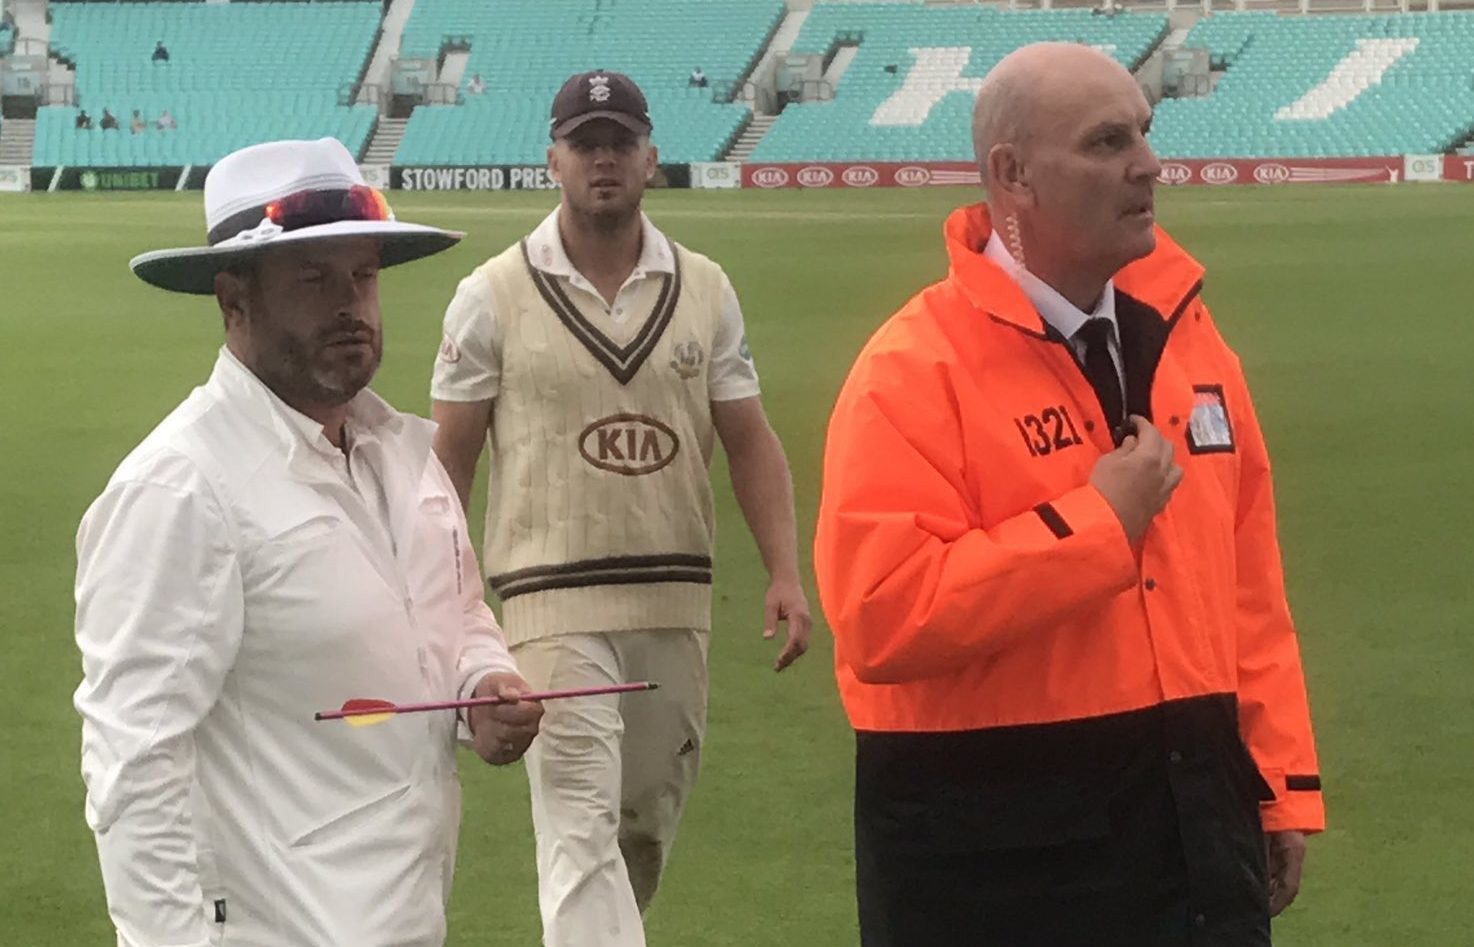 Picture taken with permission from the twitter feed of @topmanjem of a match official holding an arrow that was fired on to the pitch at the Kia Oval during a County Championship clash between Surrey and Middlesex.